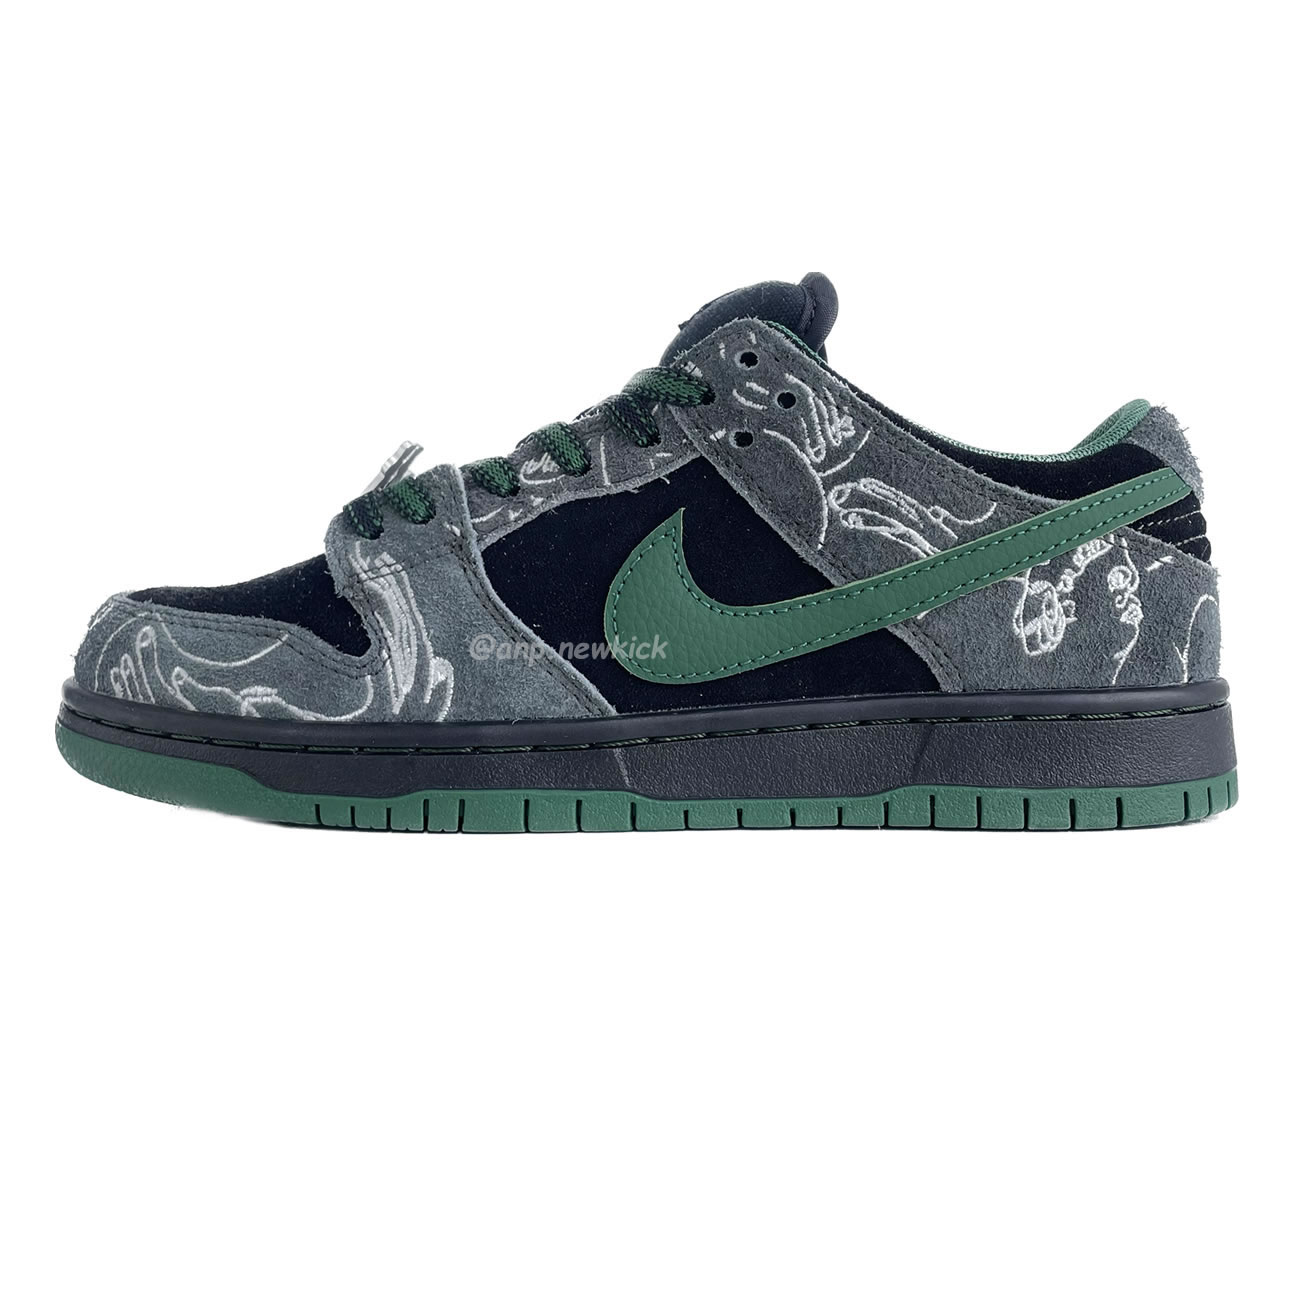 Nike Sb Dunk Low There Skateboards Hf7743 001 (1) - newkick.org